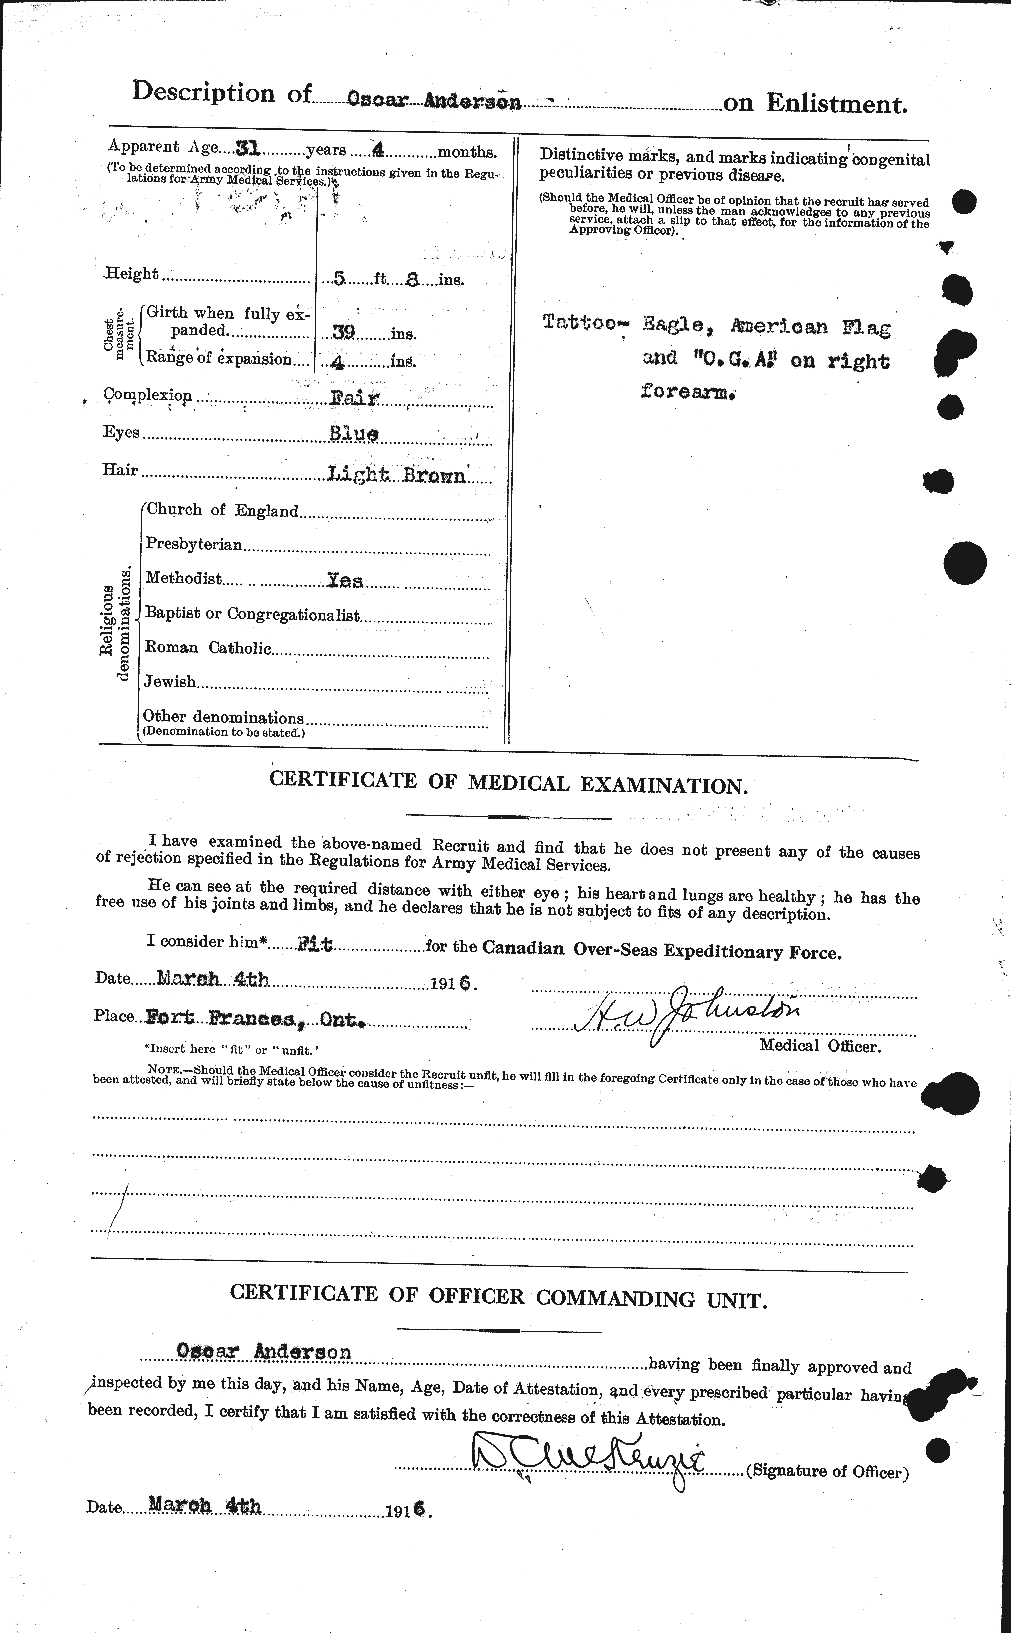 Personnel Records of the First World War - CEF 207388b